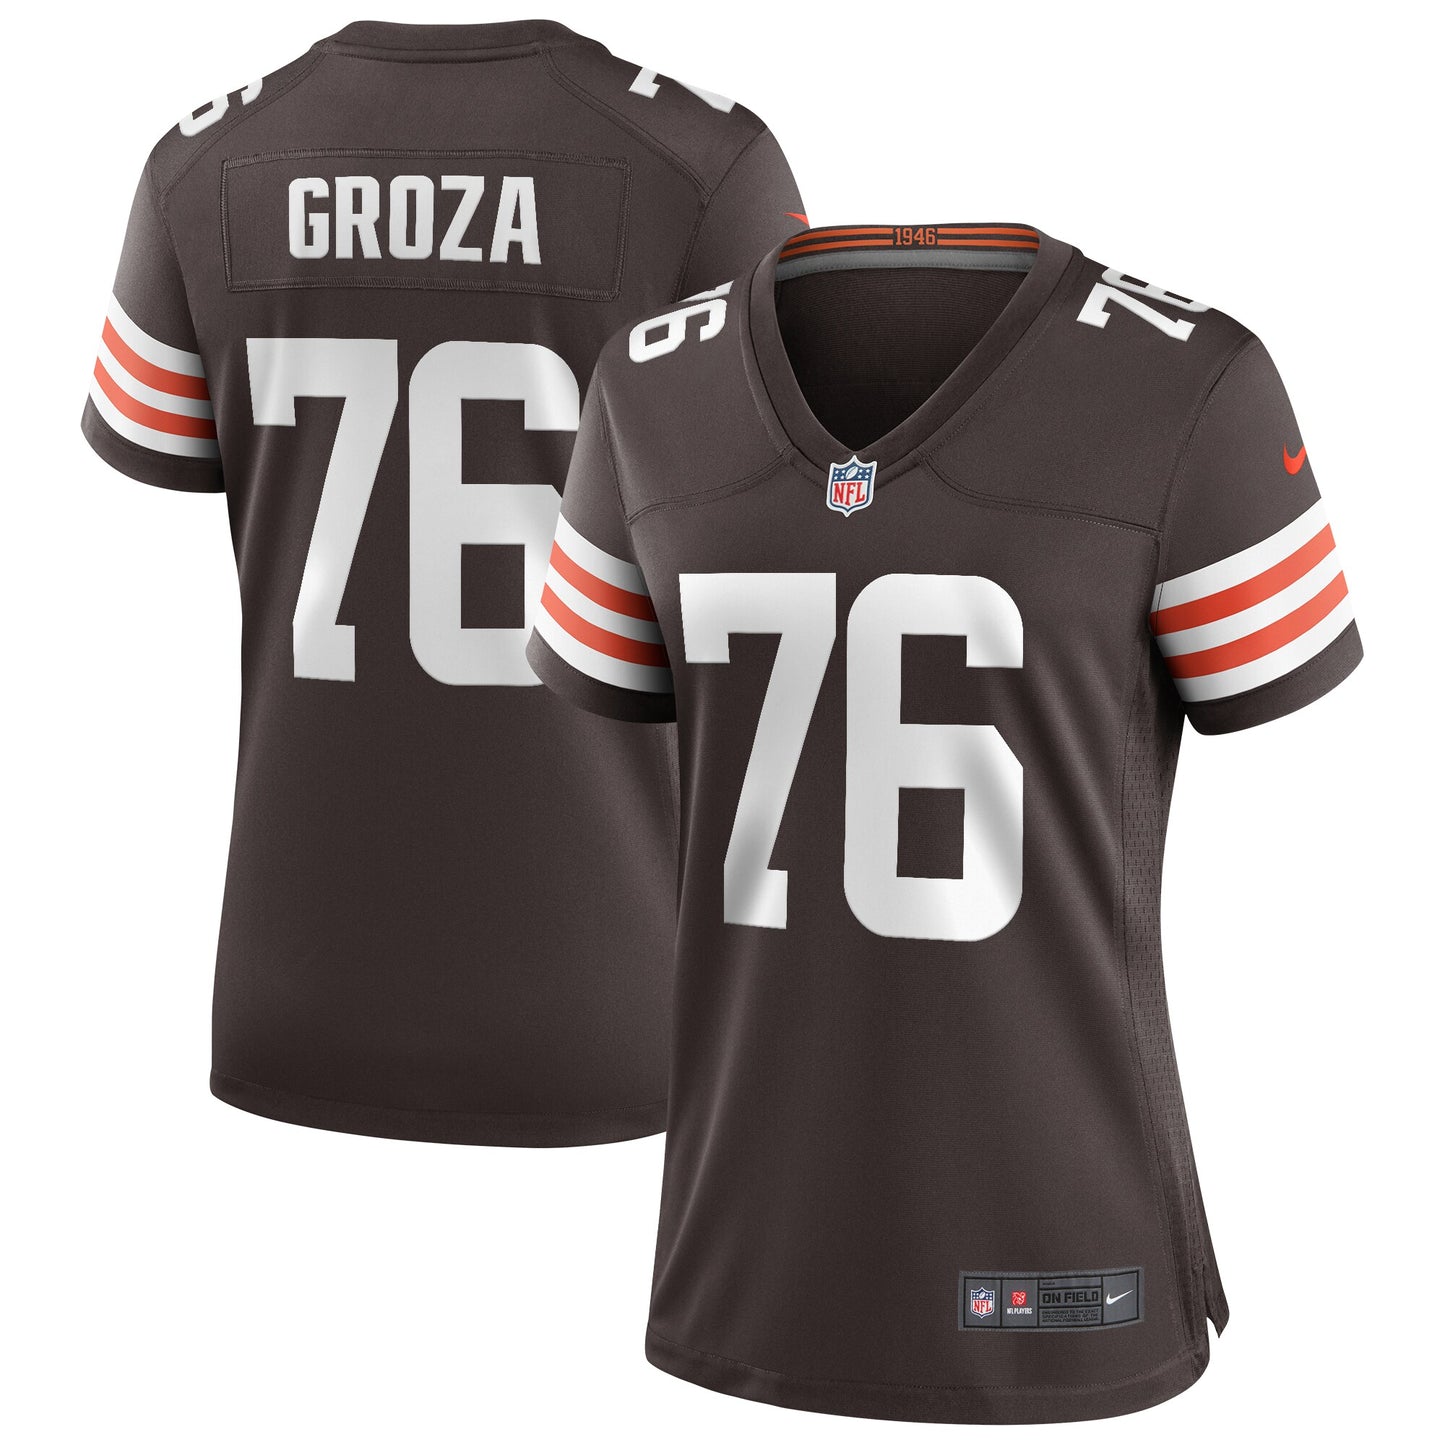 Lou Groza Cleveland Browns Nike Women's Game Retired Player Jersey - Brown